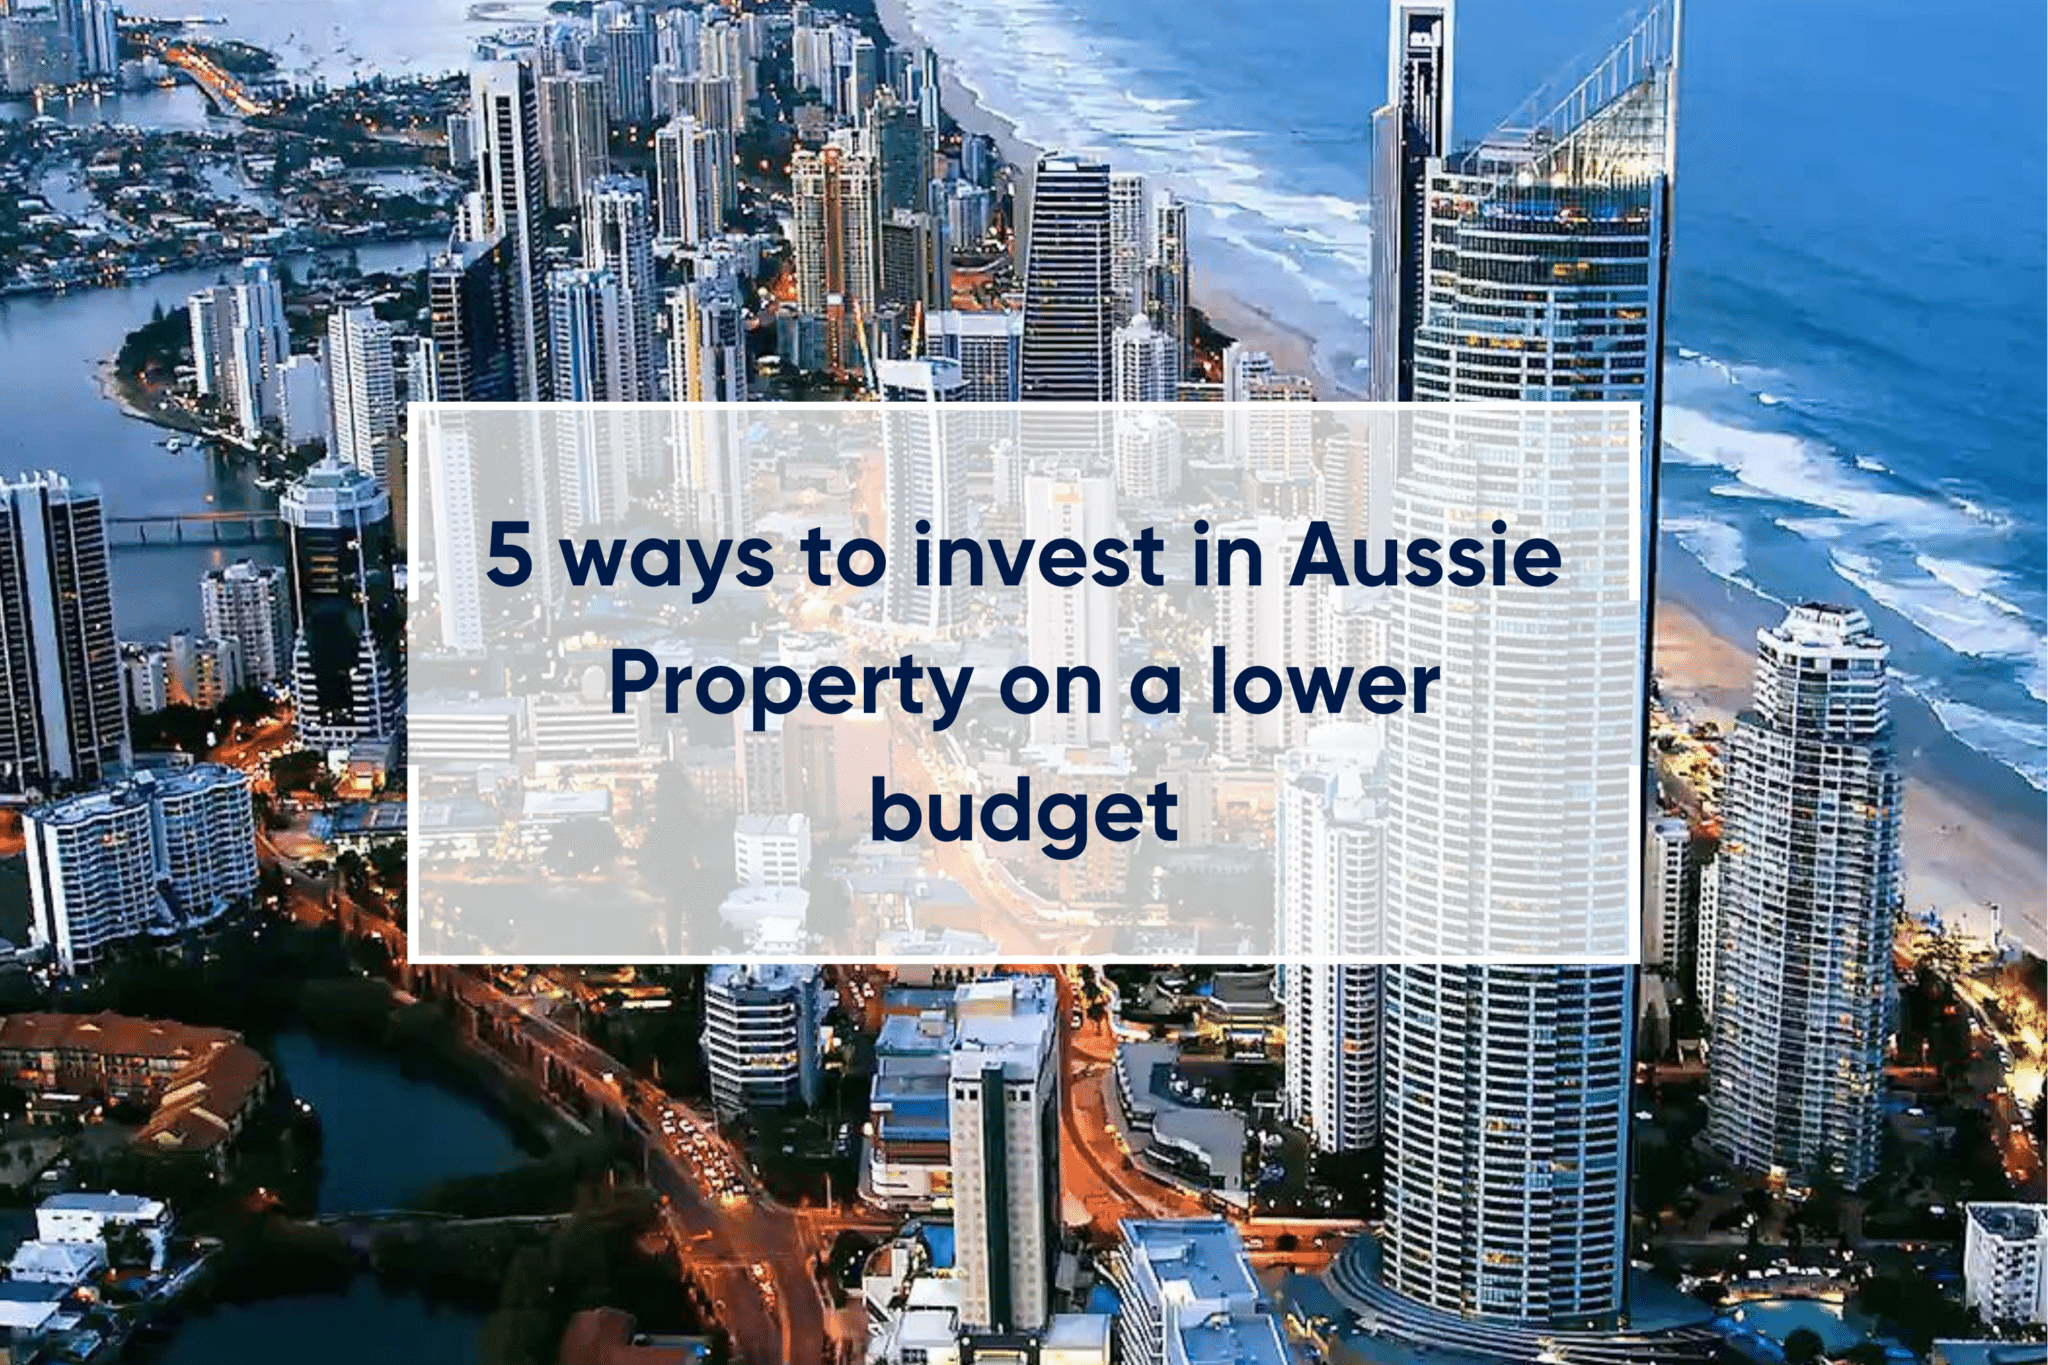 5 ways to invest in Aussie property on a lower budget